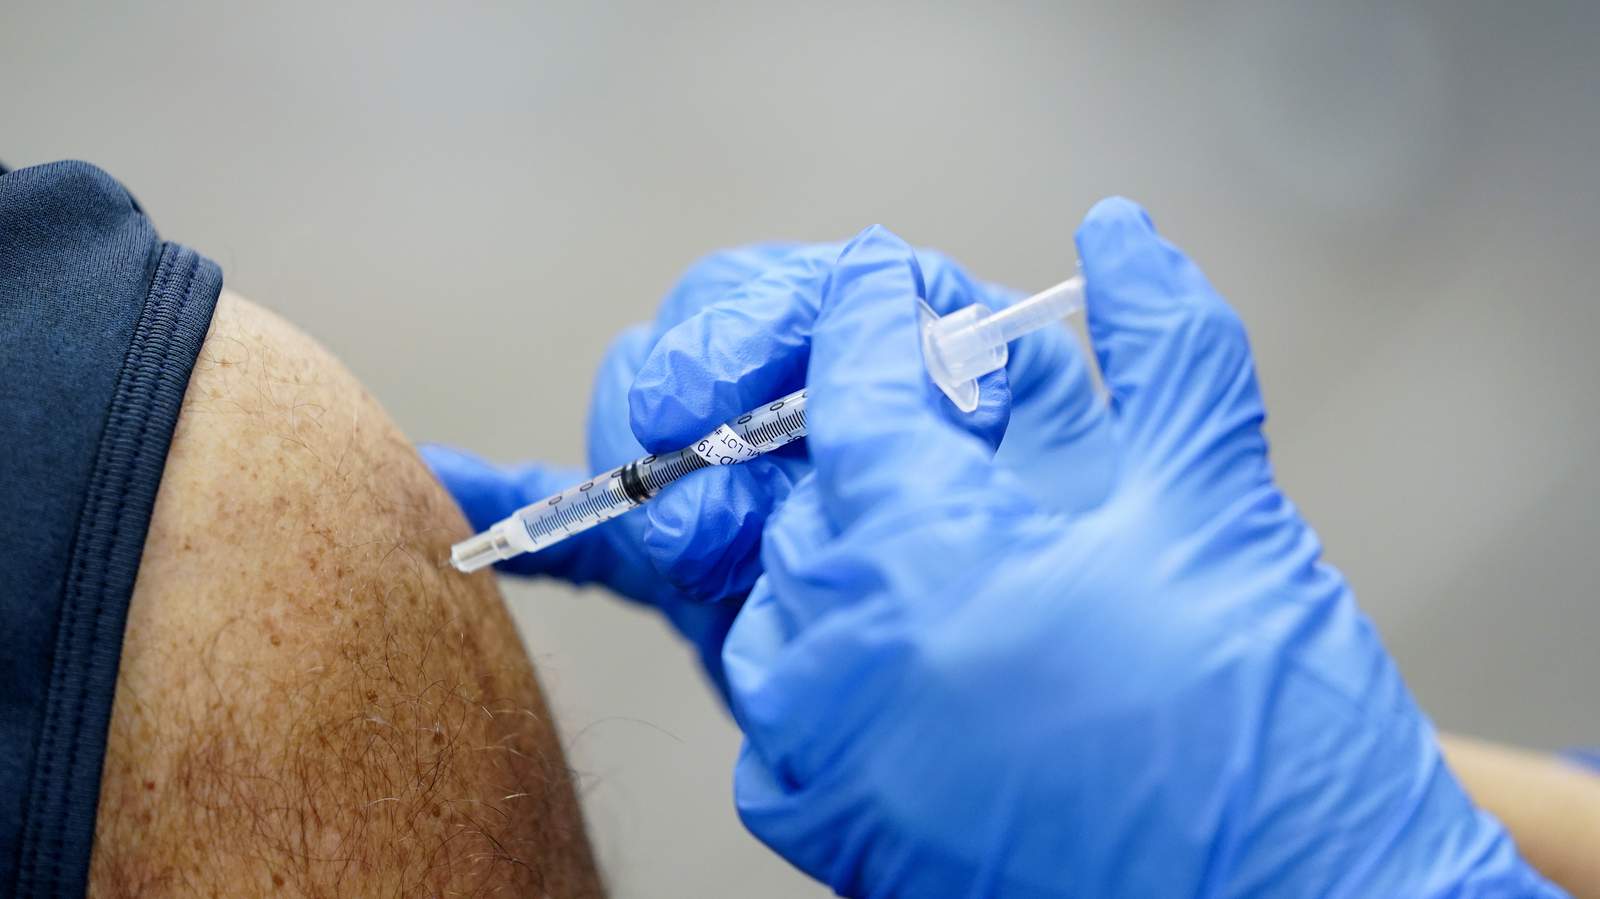 Morning Briefing April 7, 2021: Experts weigh in on Michigan’s virus surge, what being fully vaccinated looks like; Many US students still learning remotely even as schools open